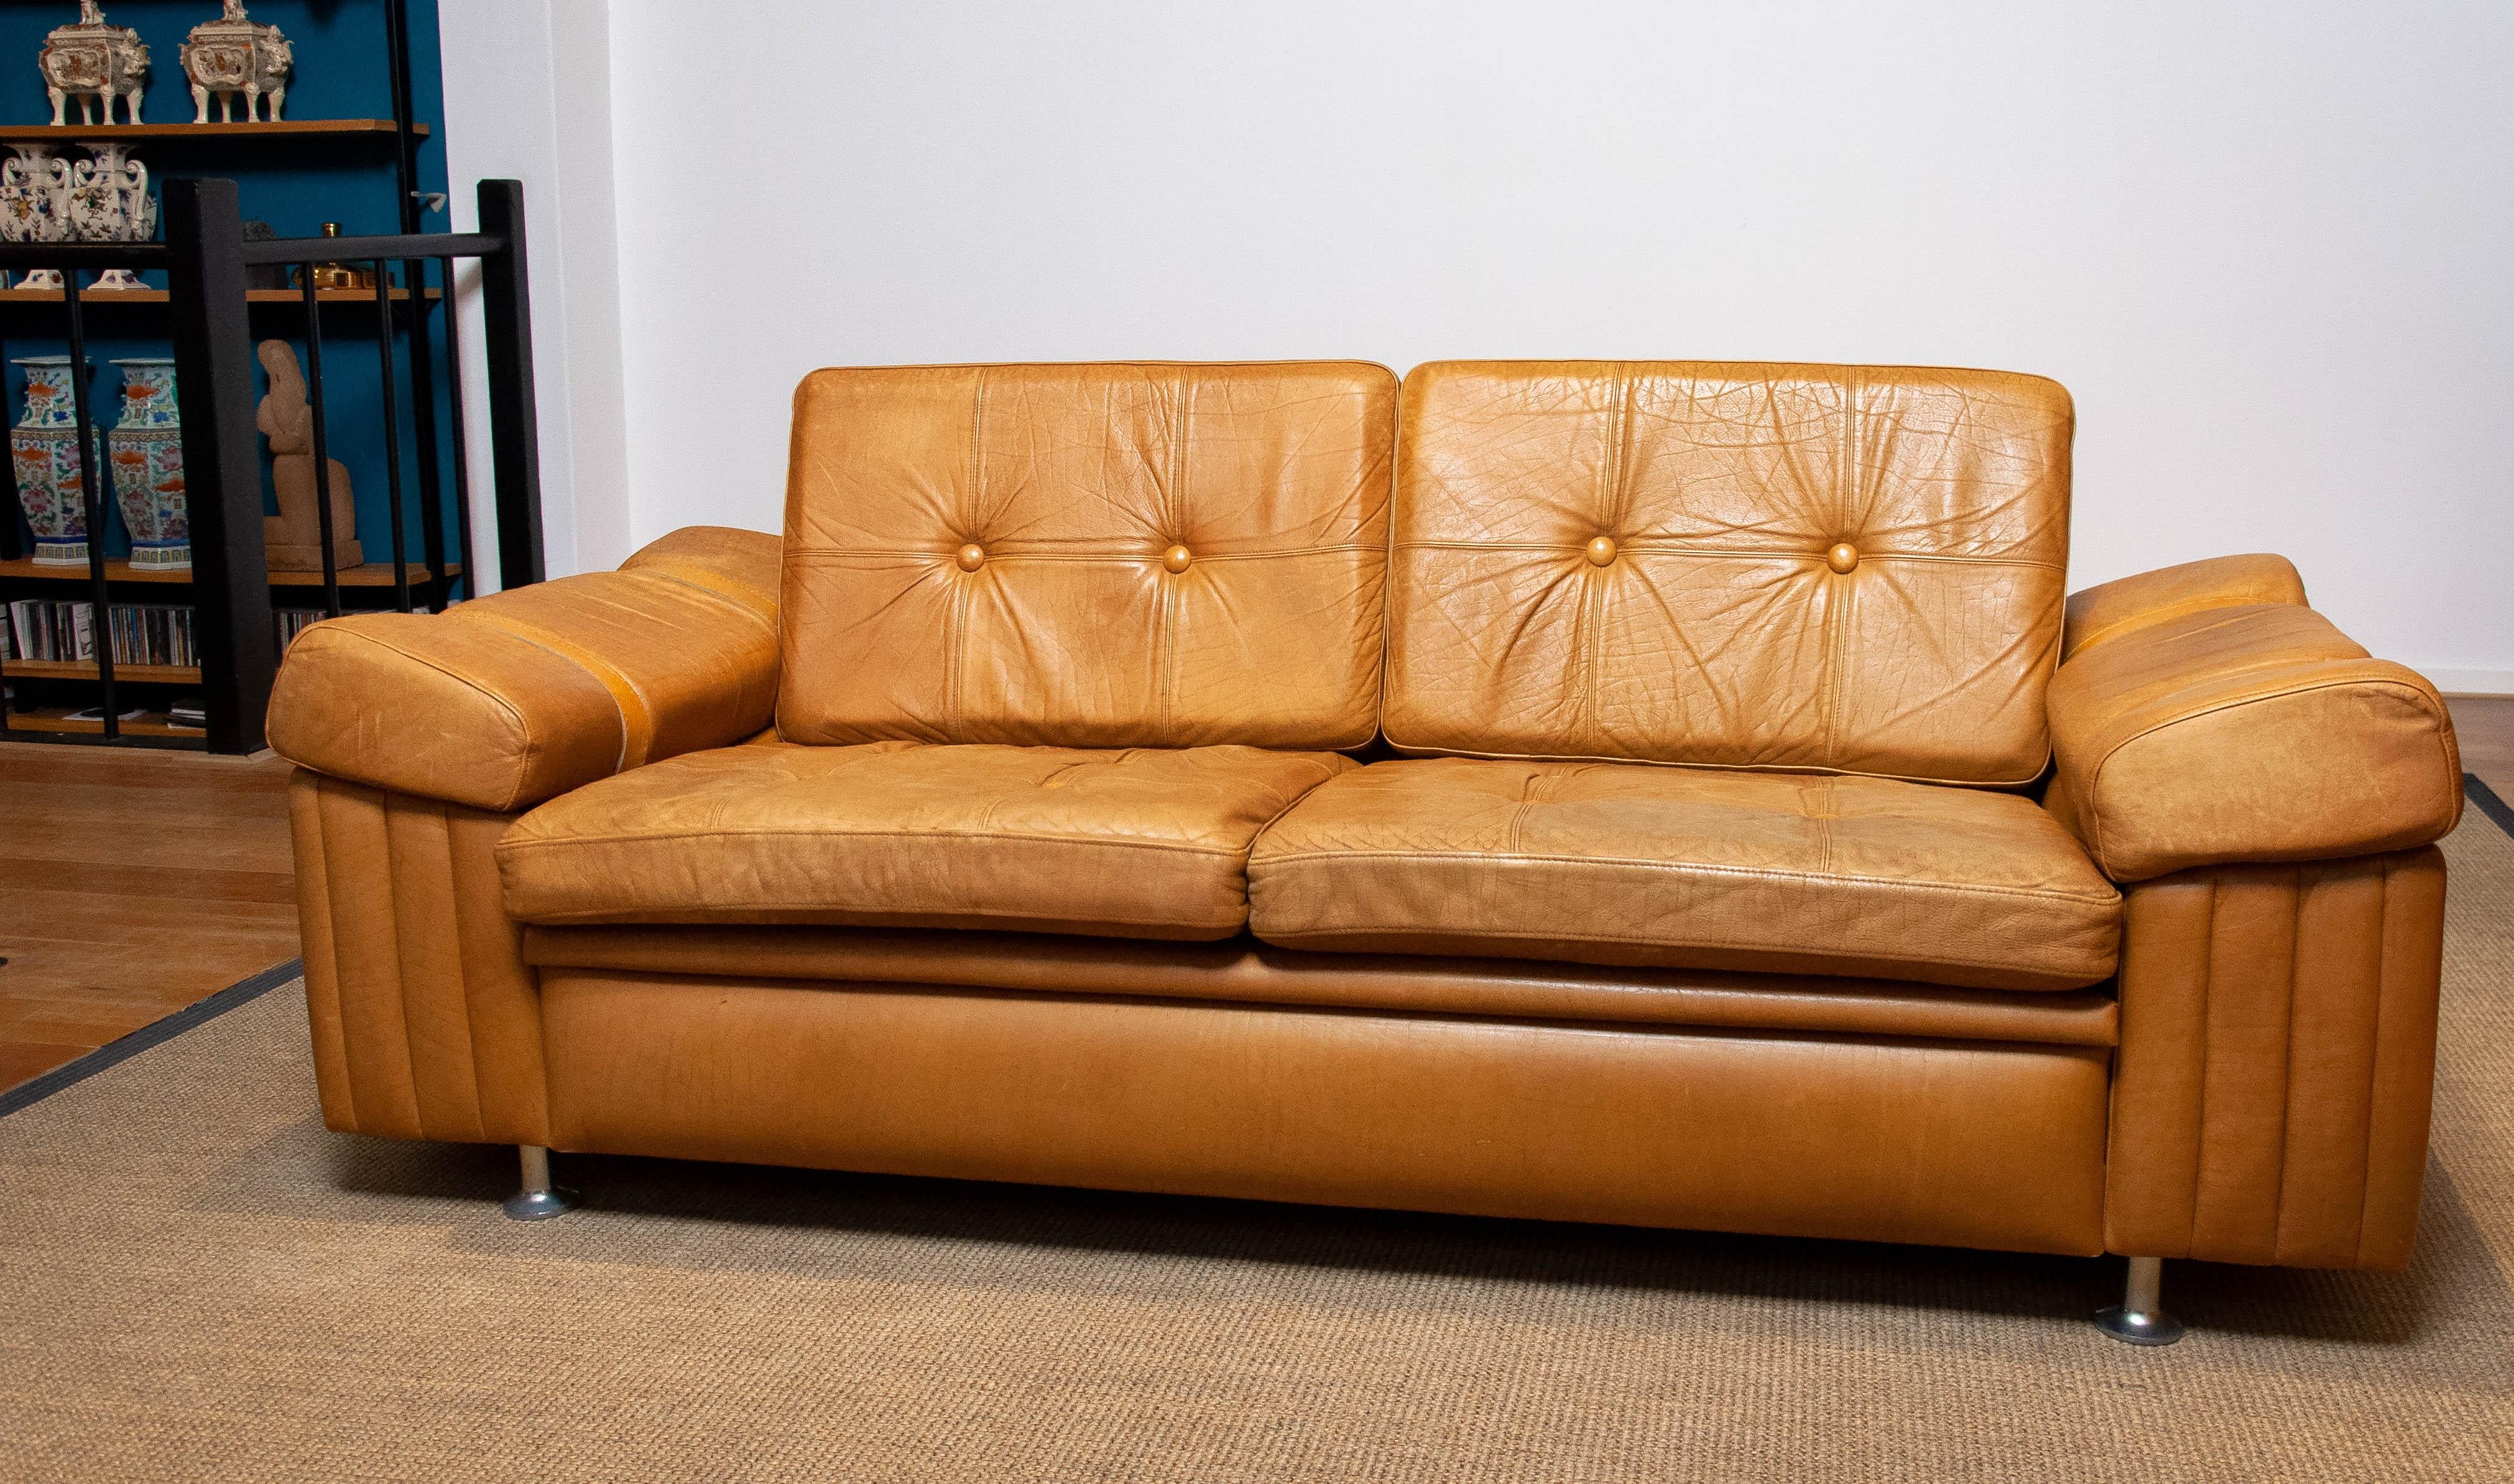 Swedish 1970s Scandinavian Brutalist Two-Seater Low-Back Sofa in Camel Colored Leather For Sale